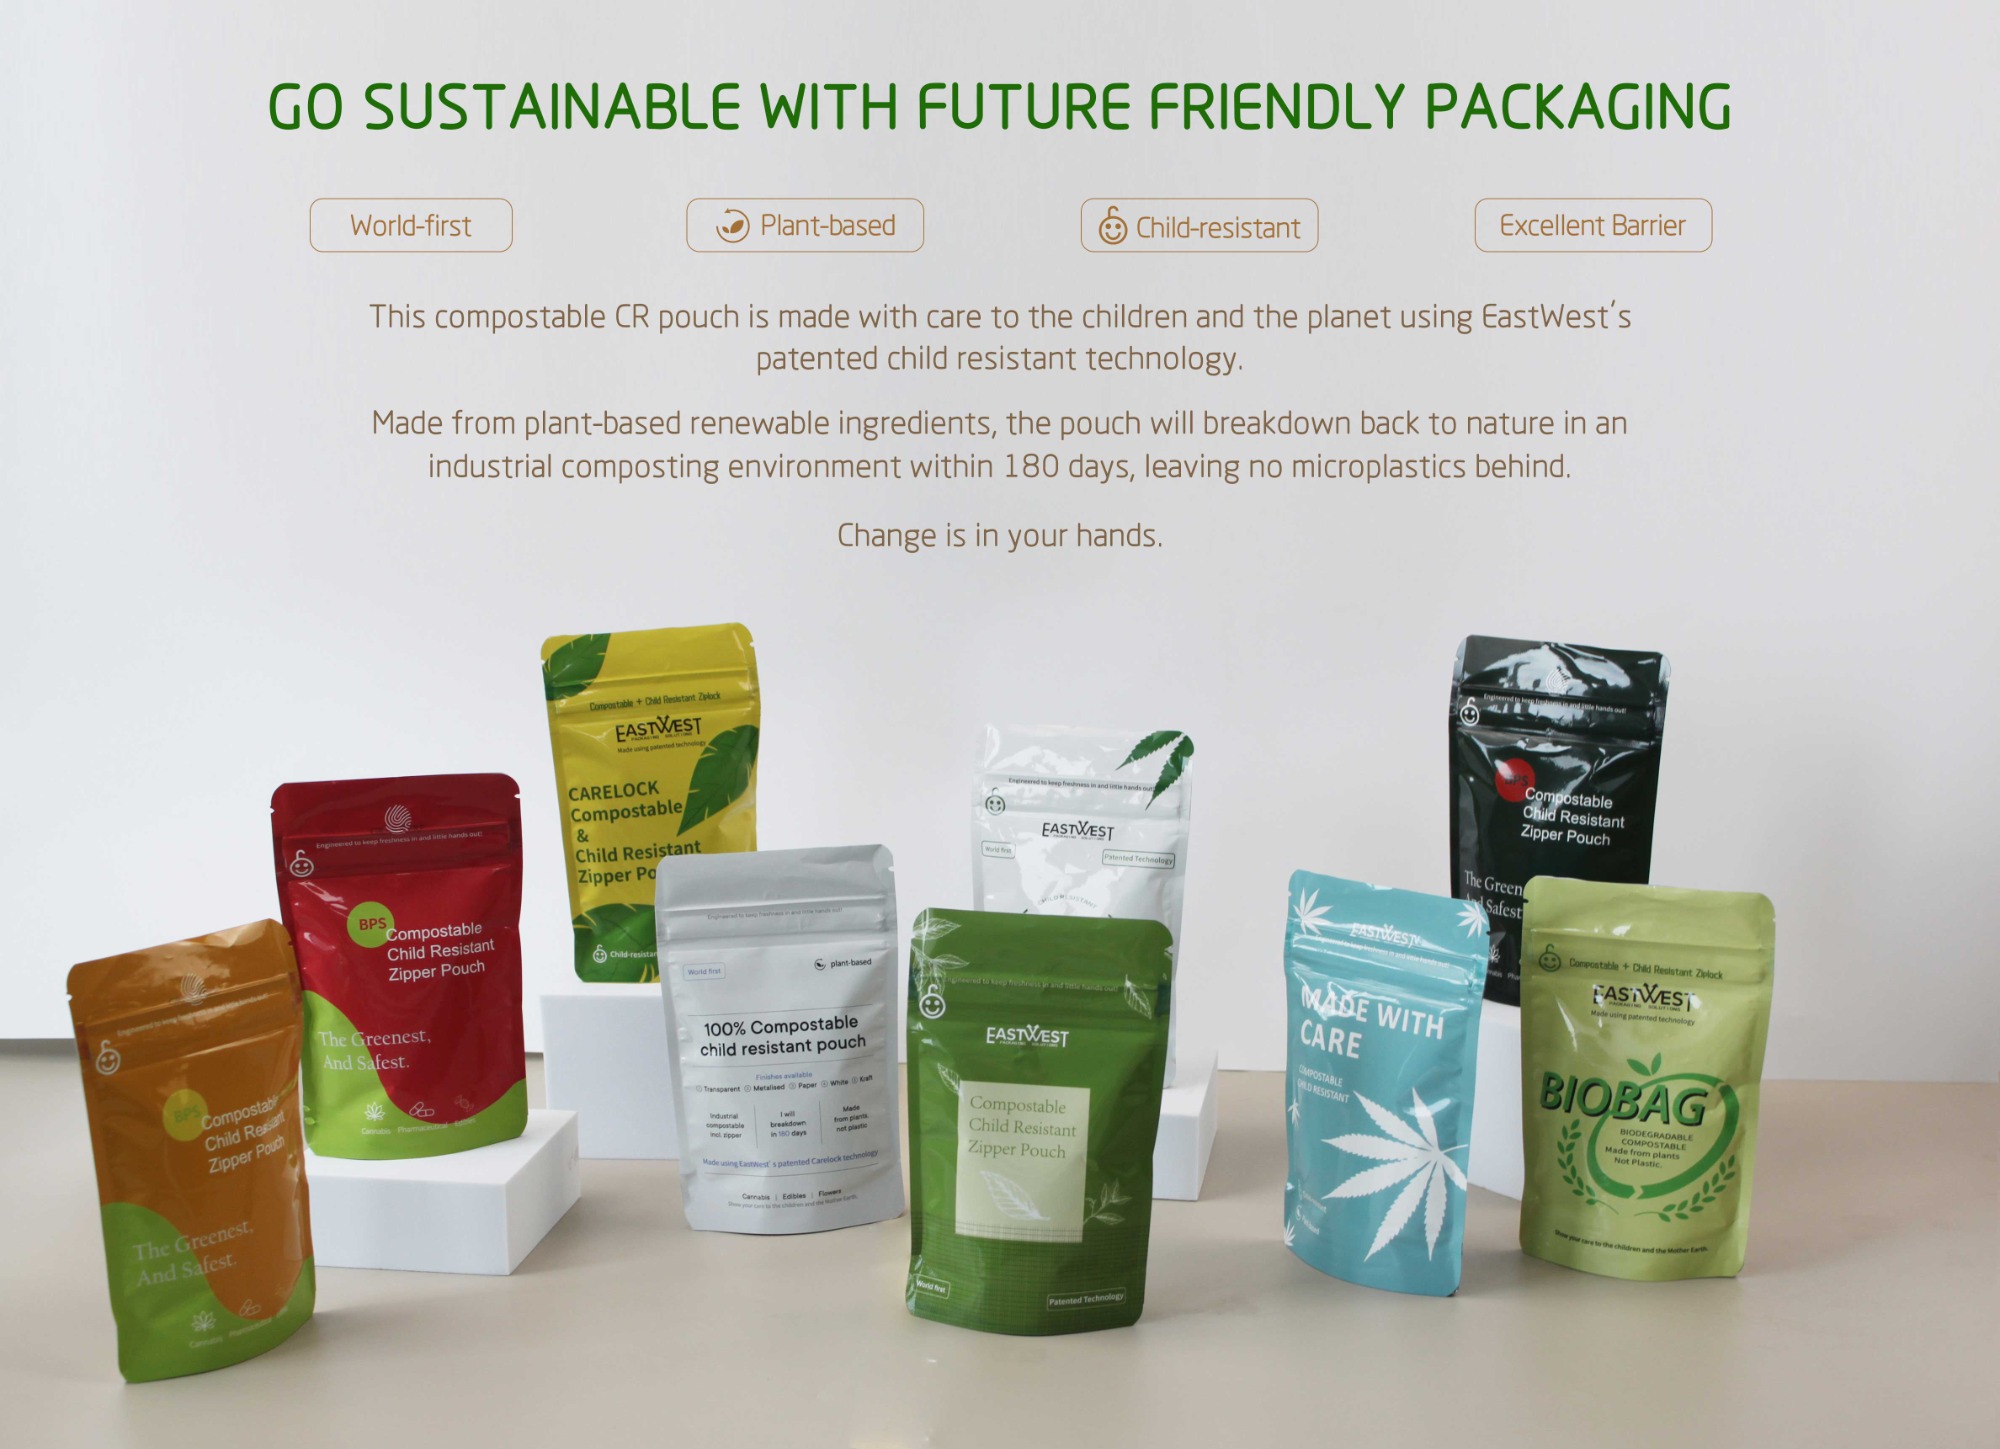 Change is in Your Hands - Go Sustainable with Compostable CR Pouches